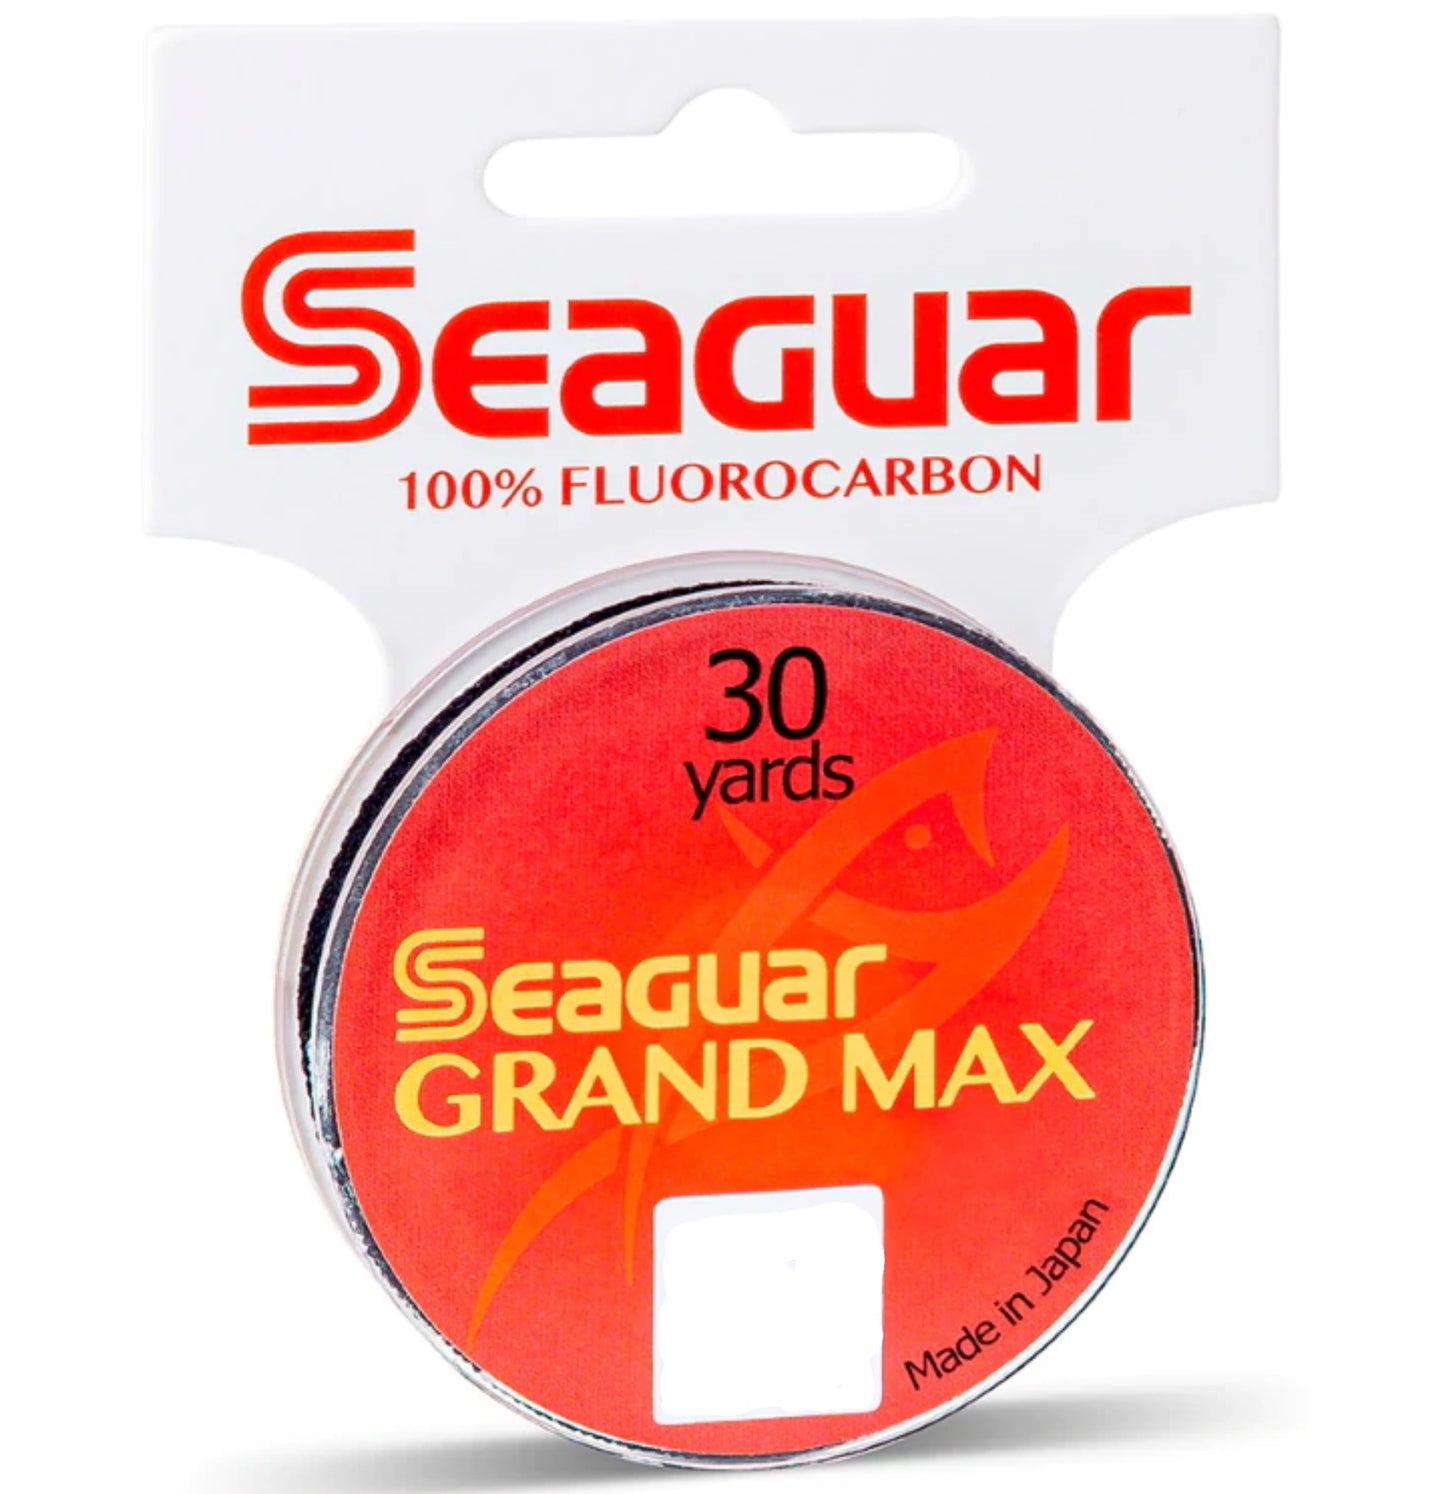 Seaguar Grand Max Fluorocarbon Tippet 30yds